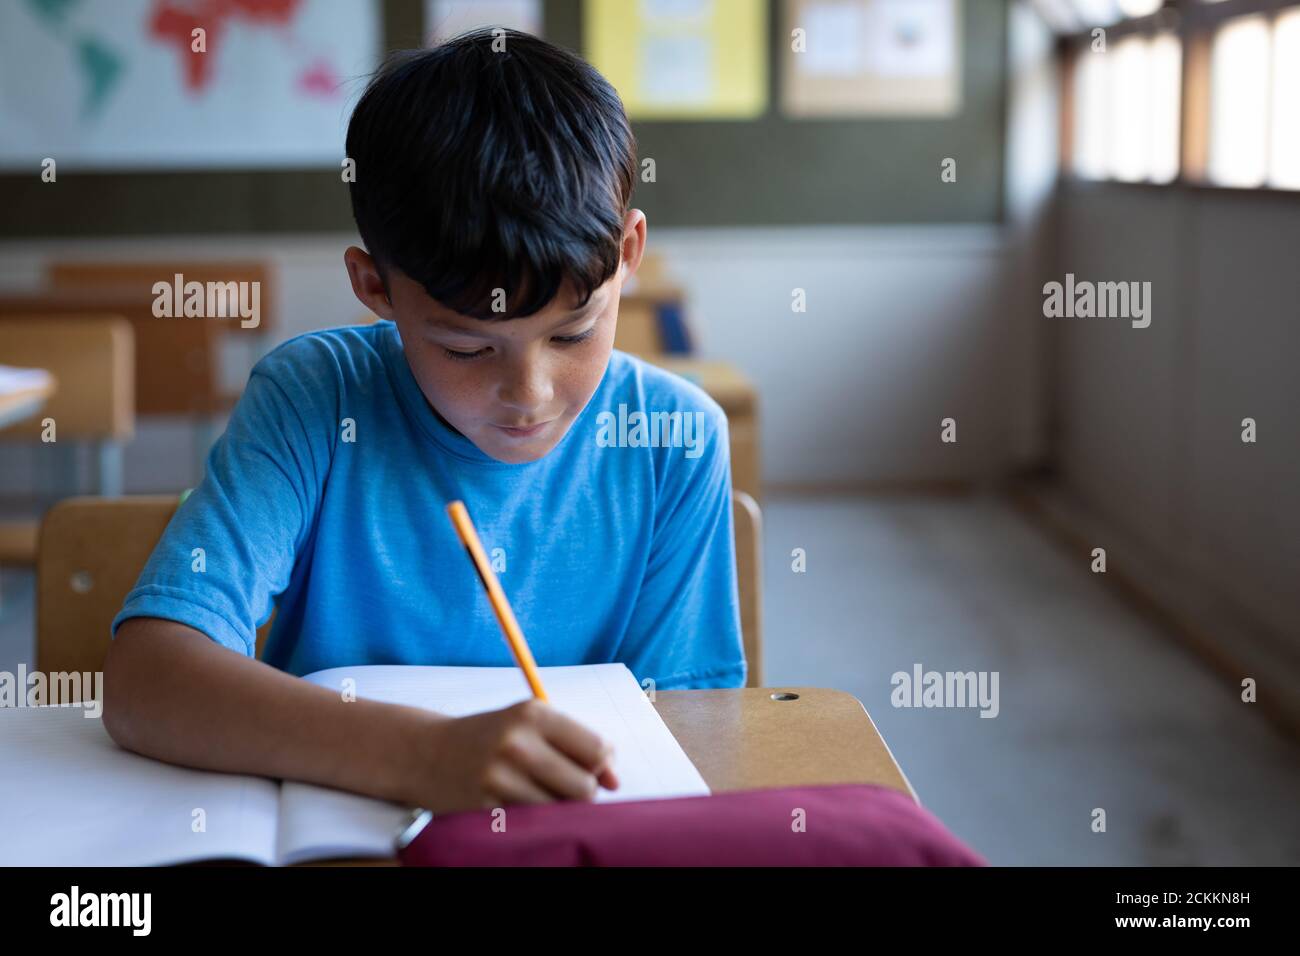 Boy writing in a book while sitting on his desk at school Stock Photo